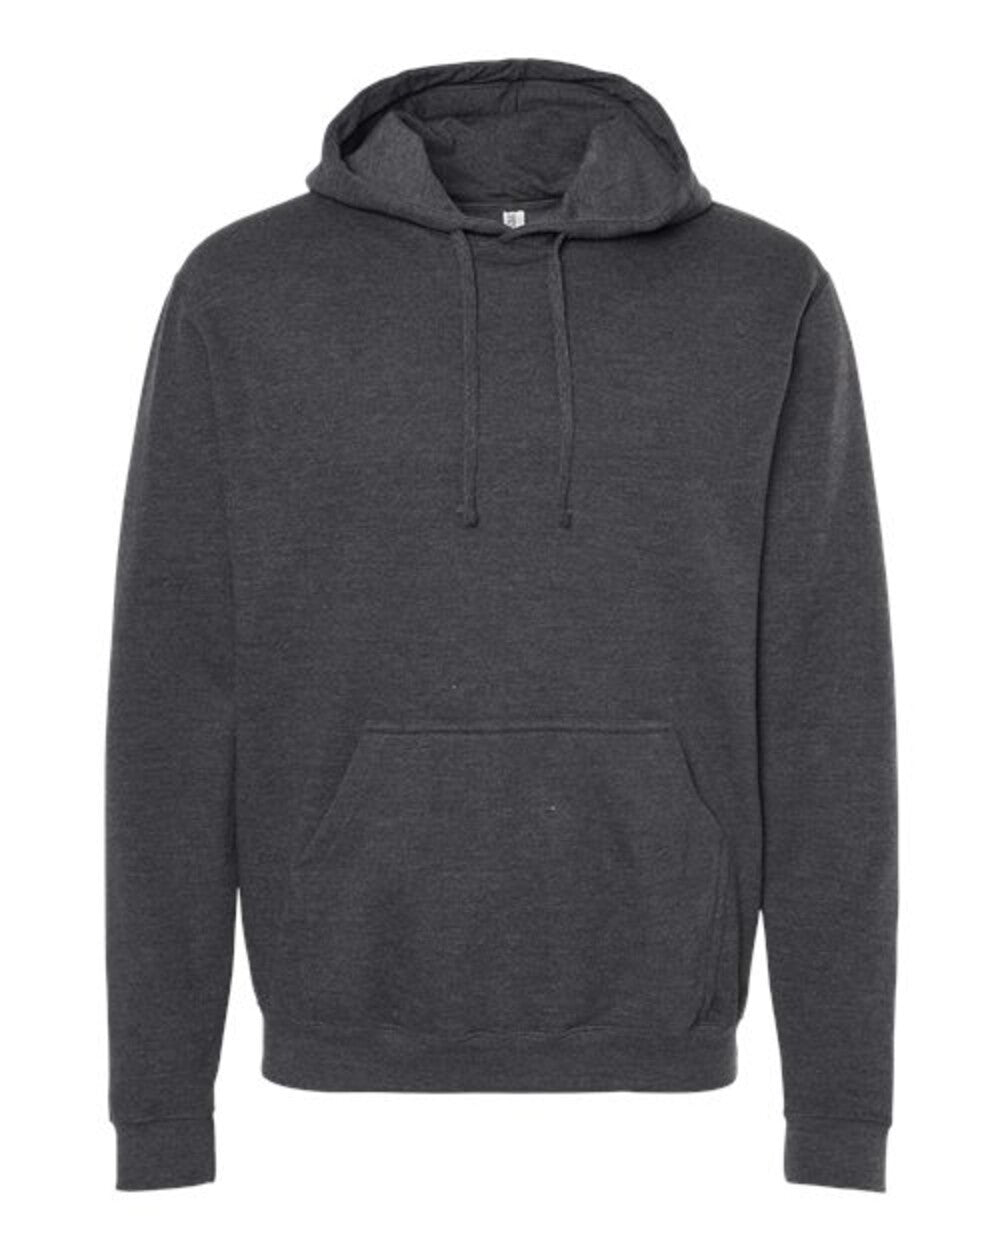 (SAMPLE PRODUCT) M&O 3320 | Unisex Pullover Hoodie